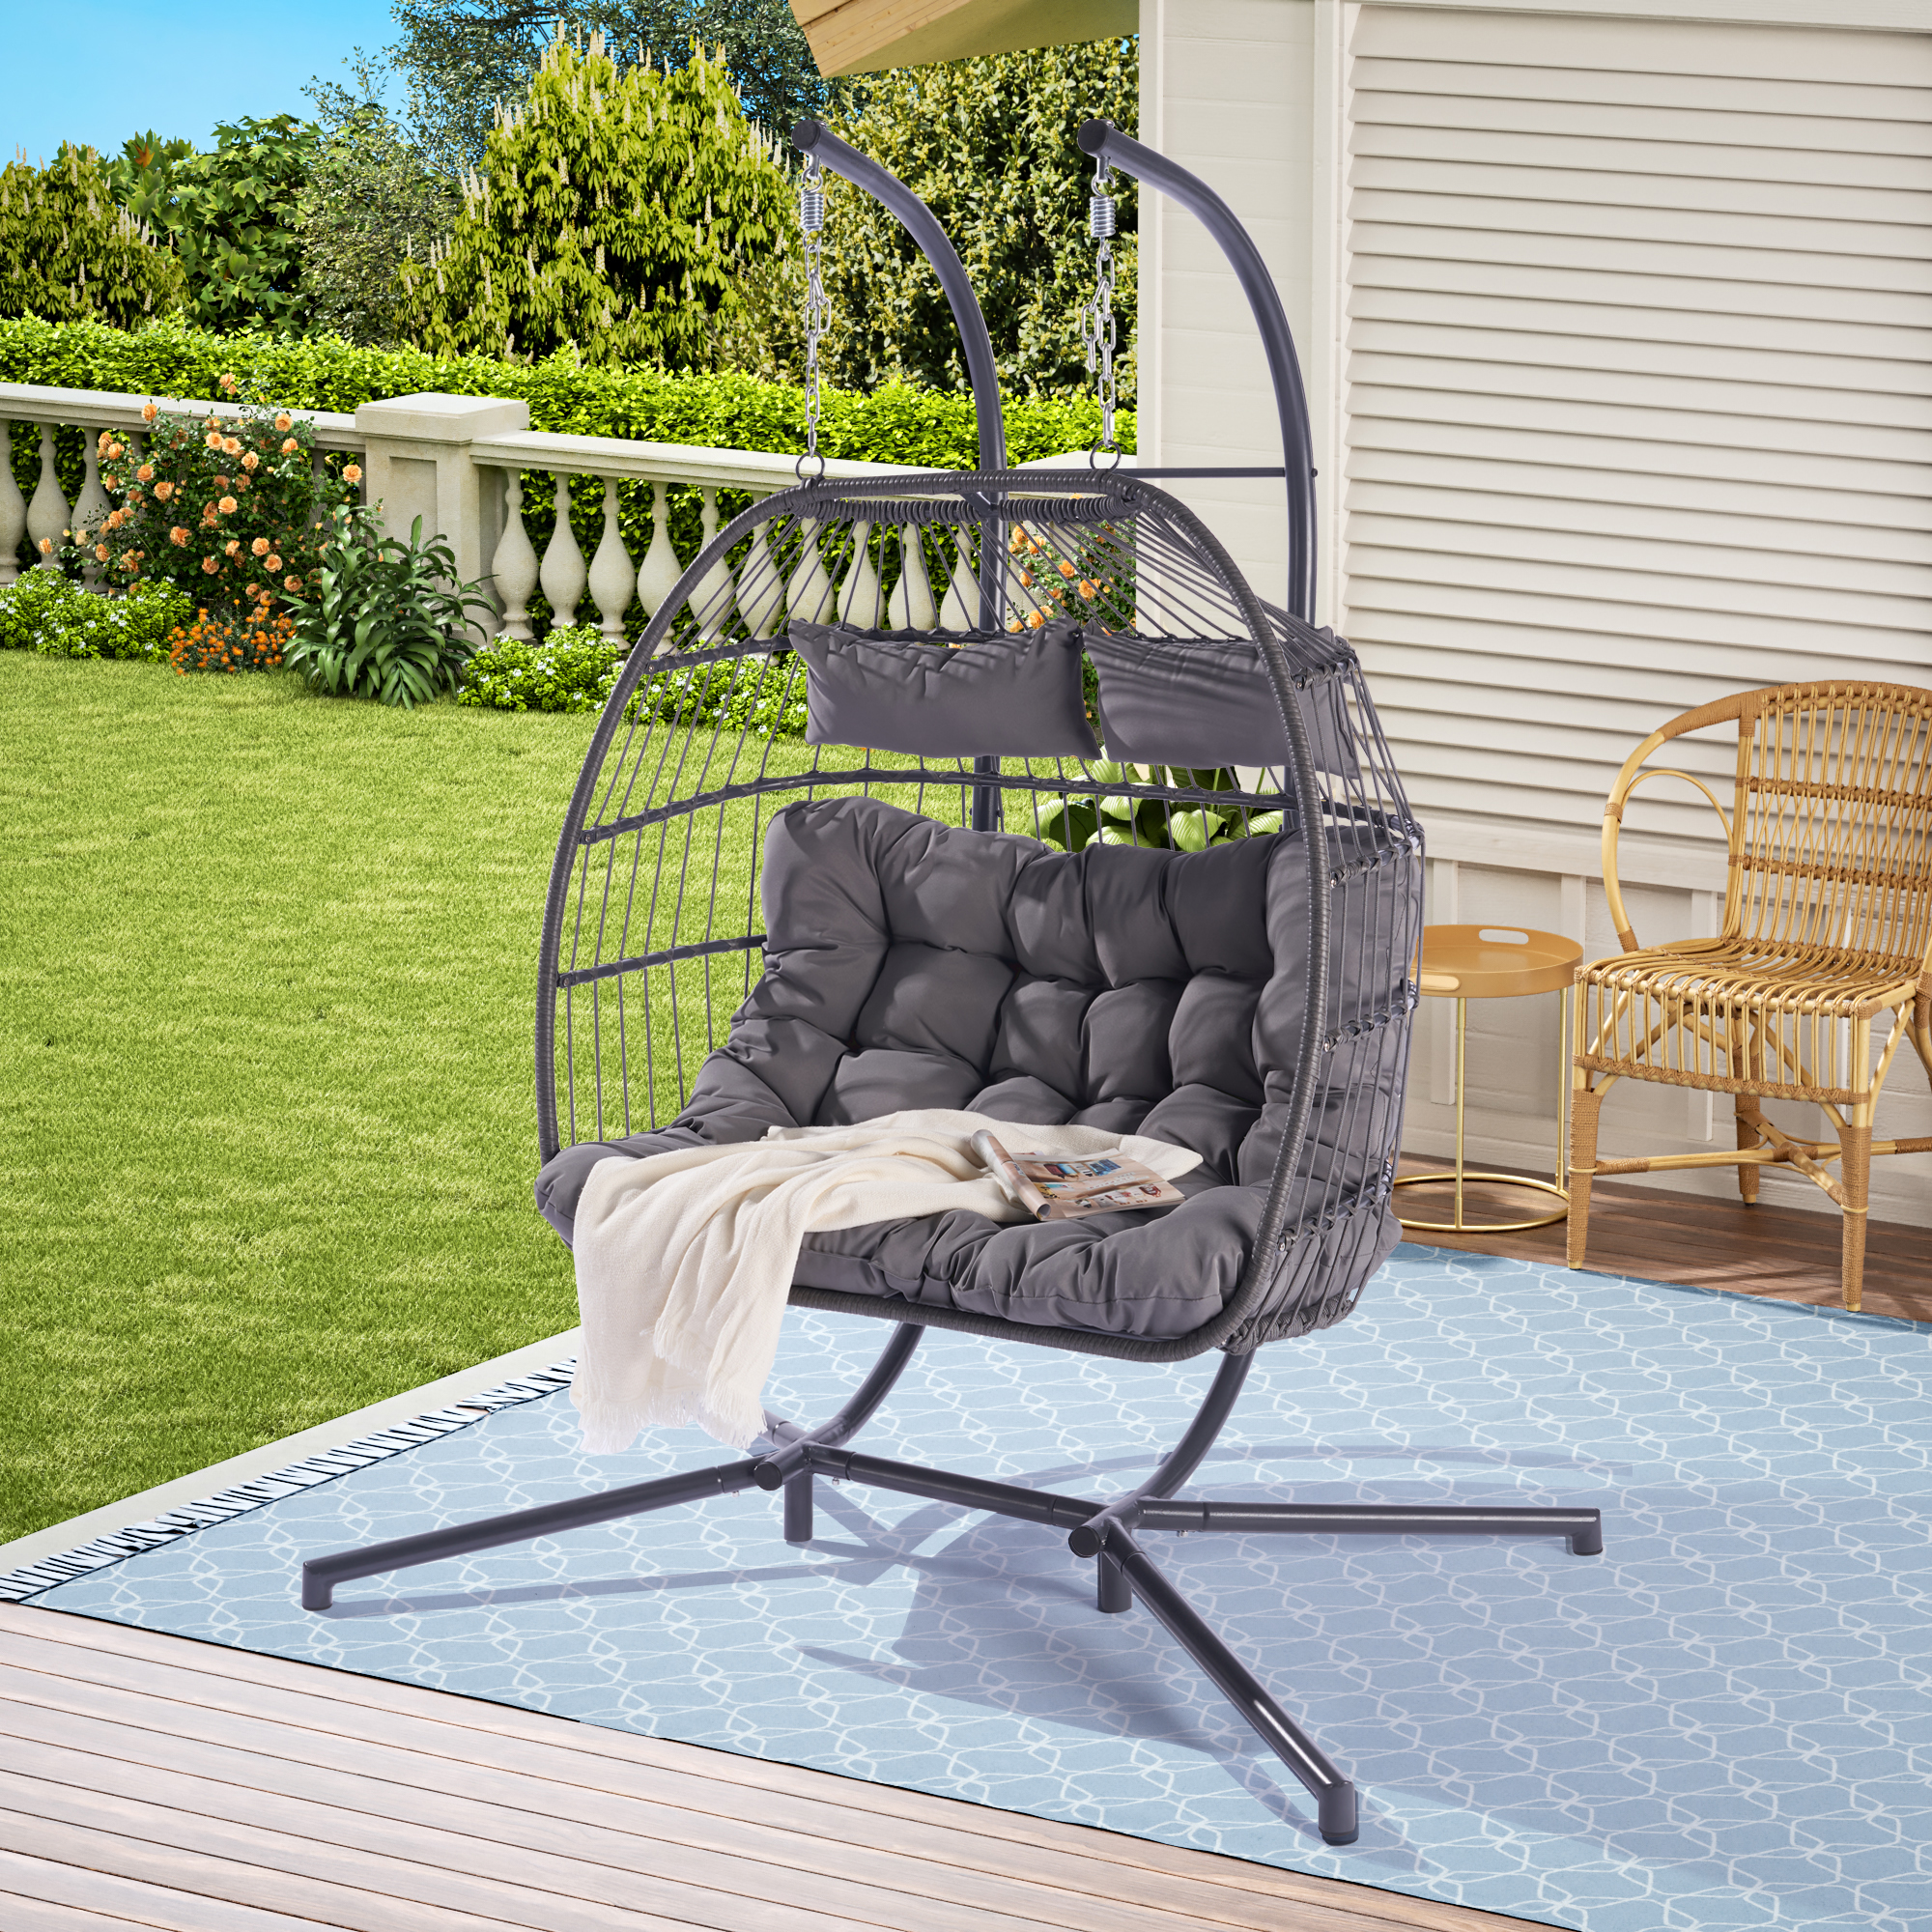 BTMWAY 2 Person Wicker Egg Chair with Stand and Removable Cushion, Outdoor Indoor Swing Hammock Chair Hanging Basket Chair for Patio Balcony Porch Living Room, Light Gray - image 2 of 9